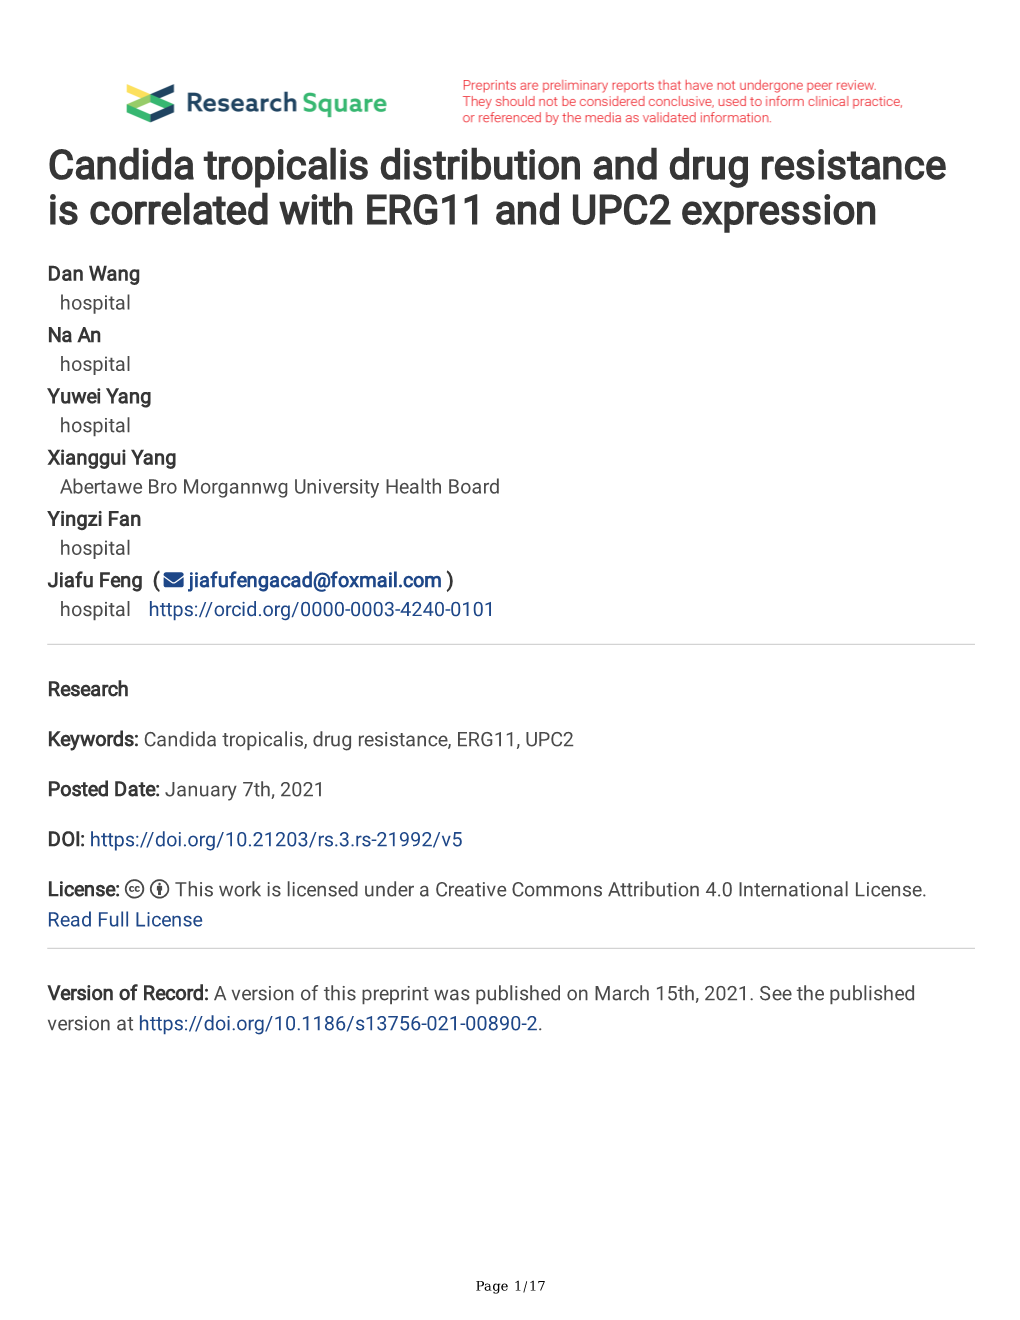 Candida Tropicalis Distribution and Drug Resistance Is Correlated with ERG11 and UPC2 Expression